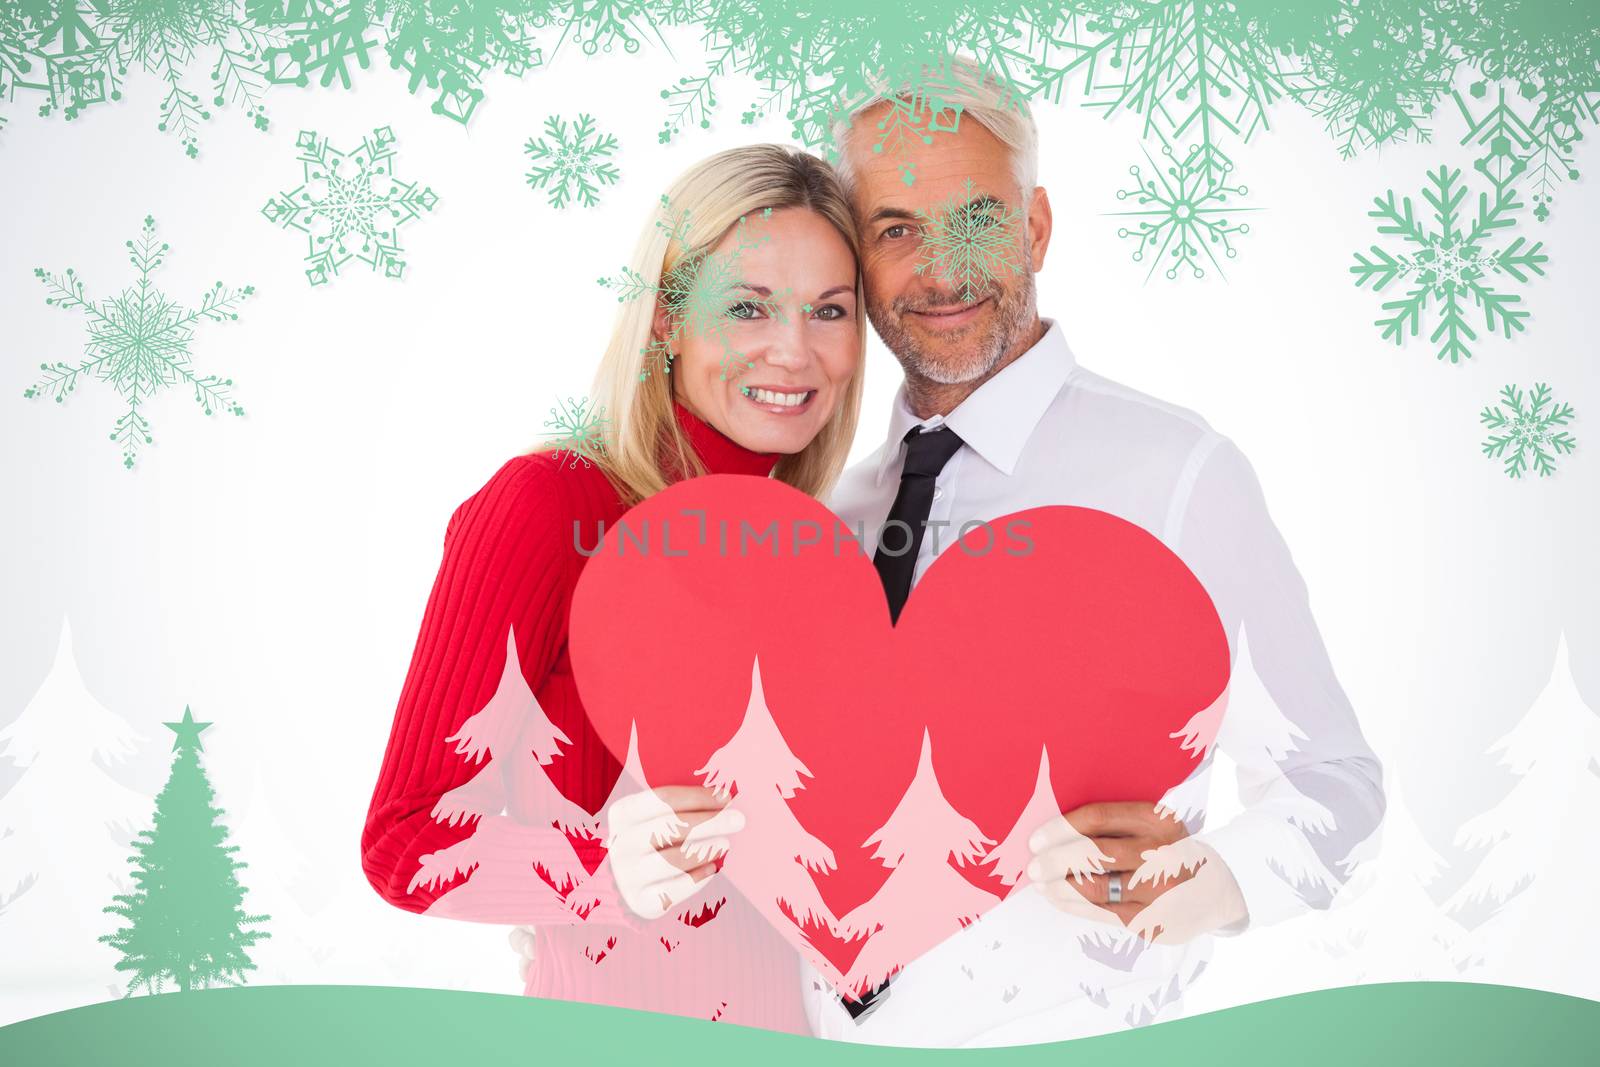 Handsome man getting a heart card form wife against snowflakes and fir tree in green